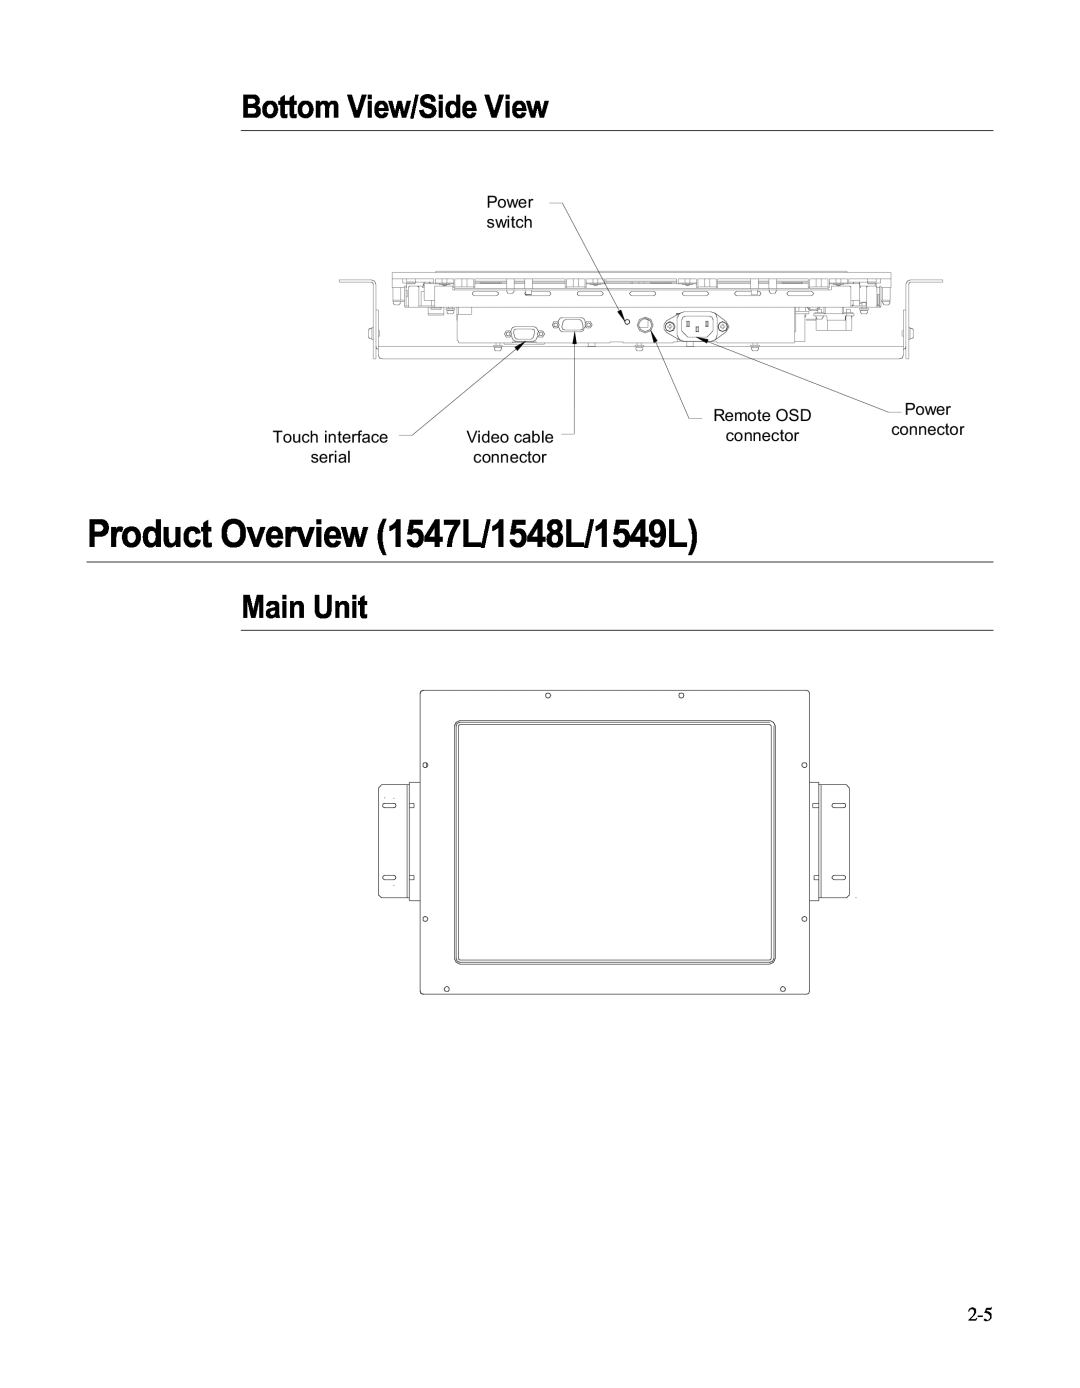 Elo TouchSystems LCD manual Product Overview 1547L/1548L/1549L, Bottom View/Side View, Main Unit 